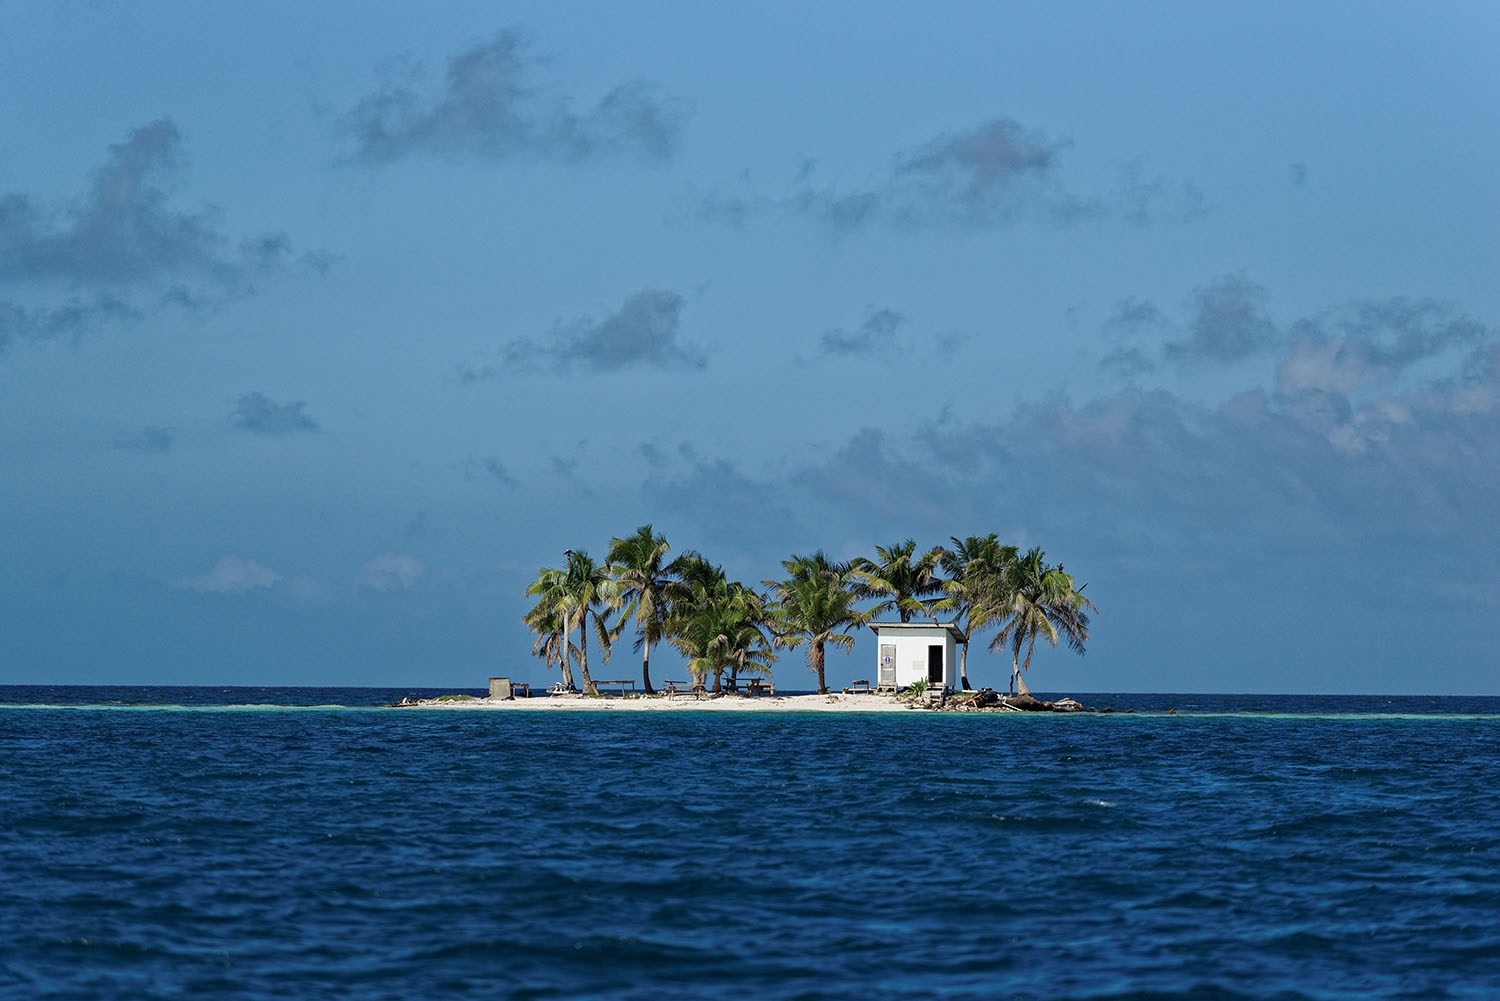 "Toilet island" in the middle of the Caribbean sea off the coast of Placencia, Belize